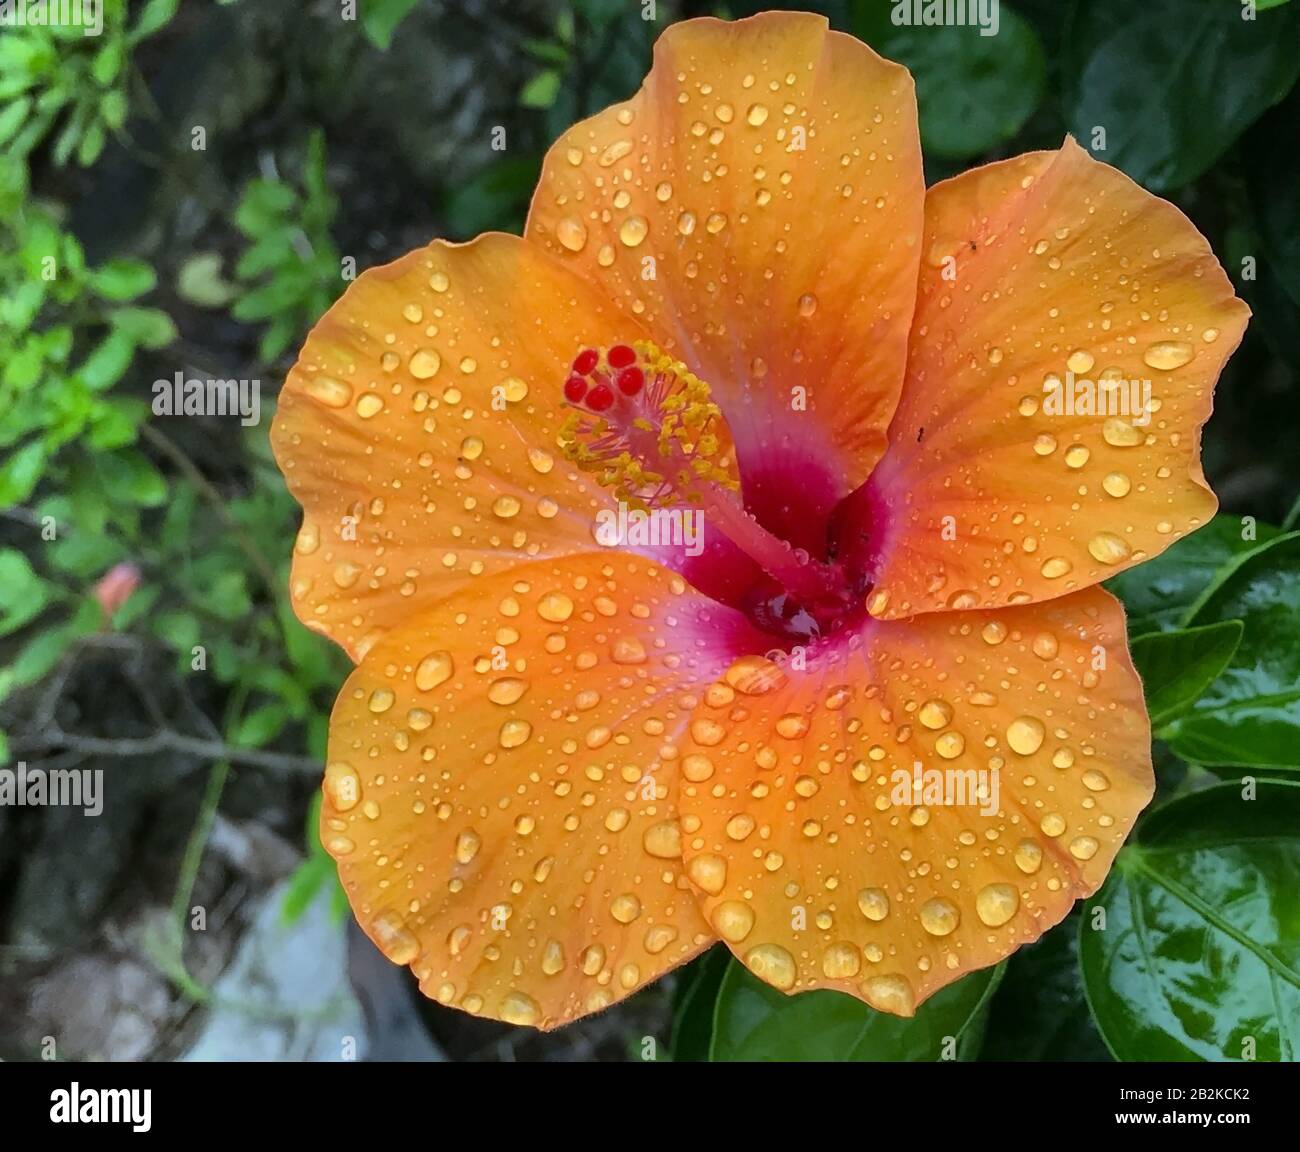 A water drops on red flower Hibiscus rosa-sinensis, close up. A drops of rain on petals of orange Hibiscus rosa sinensis. Stock Photo